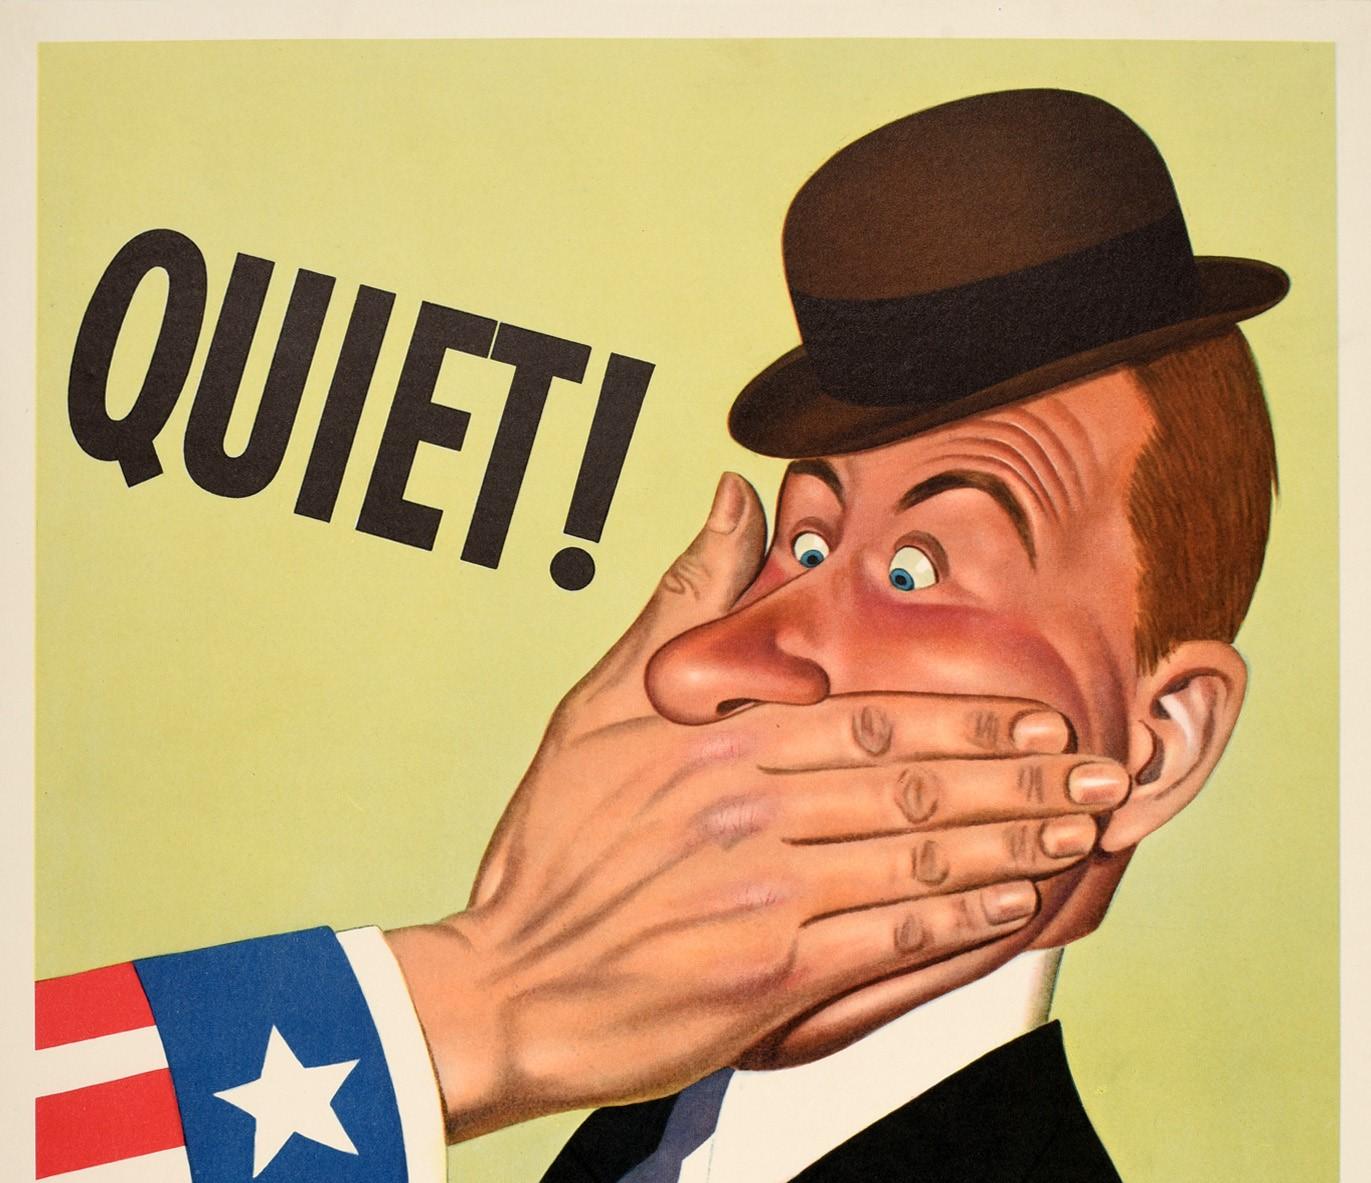 Original vintage World War Two propaganda poster - Quiet! Loose Talk Can Cost Lives - featuring a great design depicting a surprised looking businessman wearing a suit and bowler hat looking down at a large hand with an American flag on the sleeve